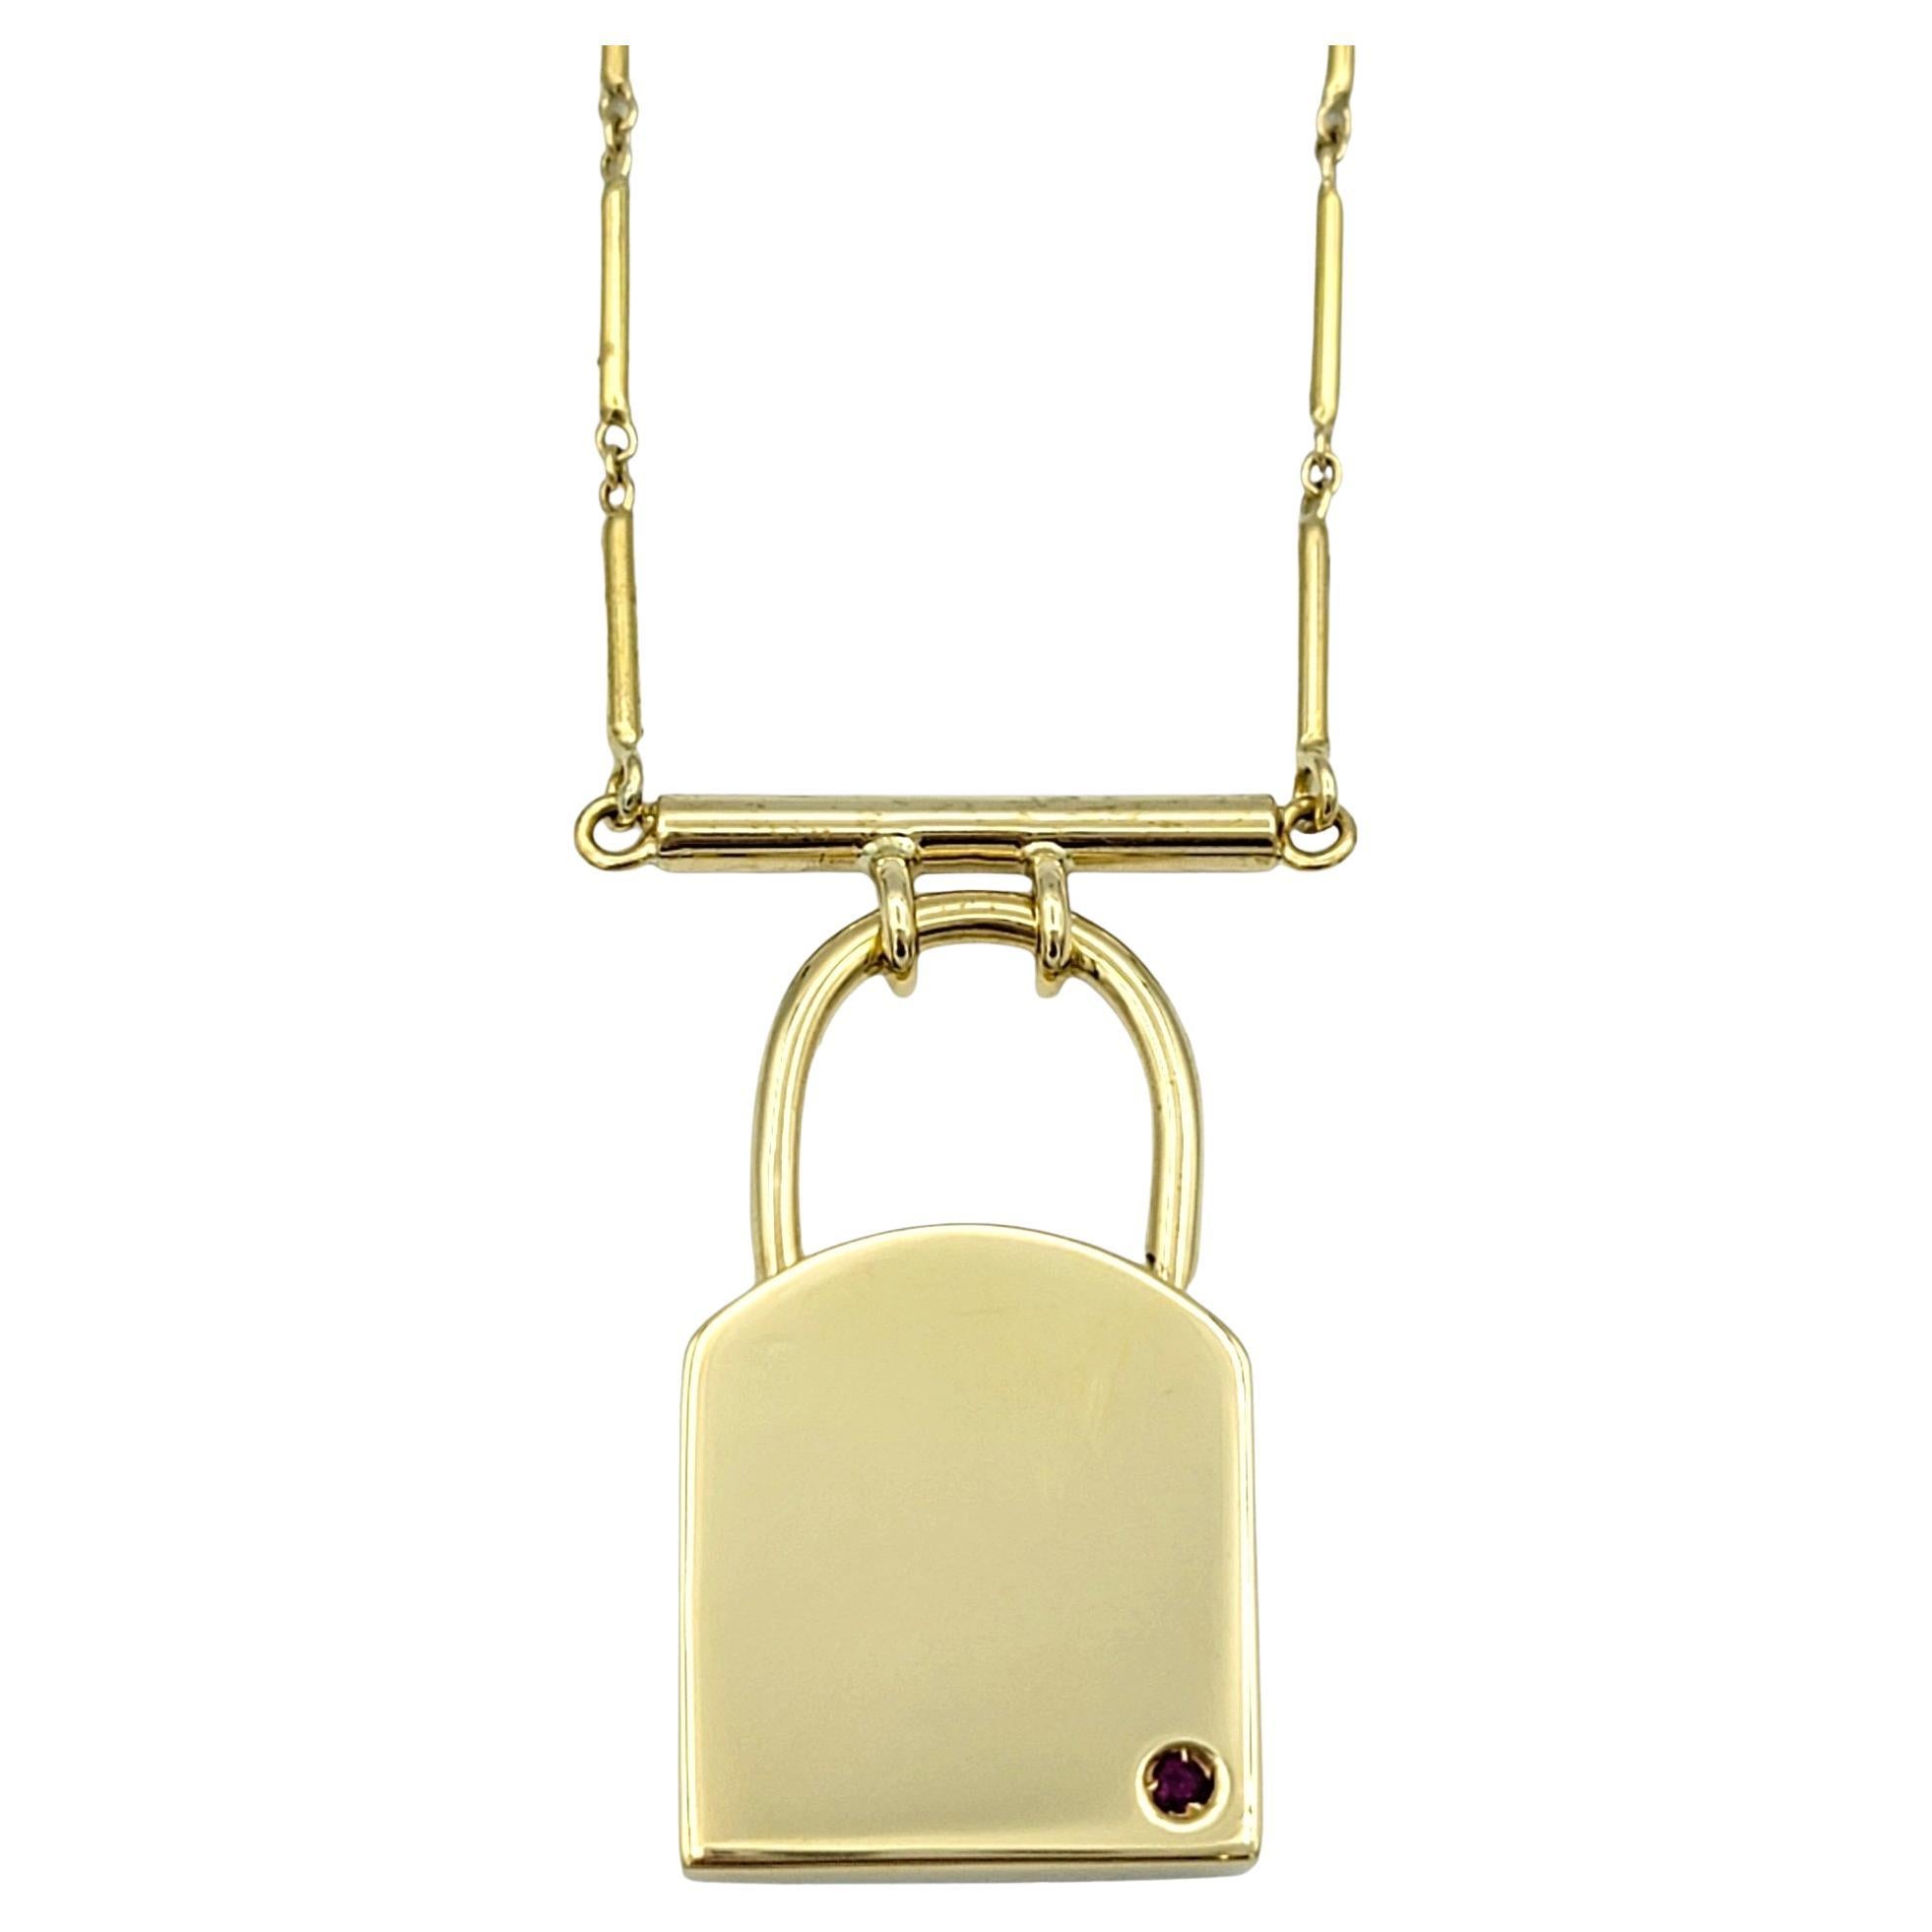 This gorgeous Roberto Coin padlock design pendant necklace, crafted in luxurious 18 karat yellow gold, is a symbol of timeless sophistication. The pendant features a simple yet elegant padlock design, exuding a sense of security and charm. Suspended